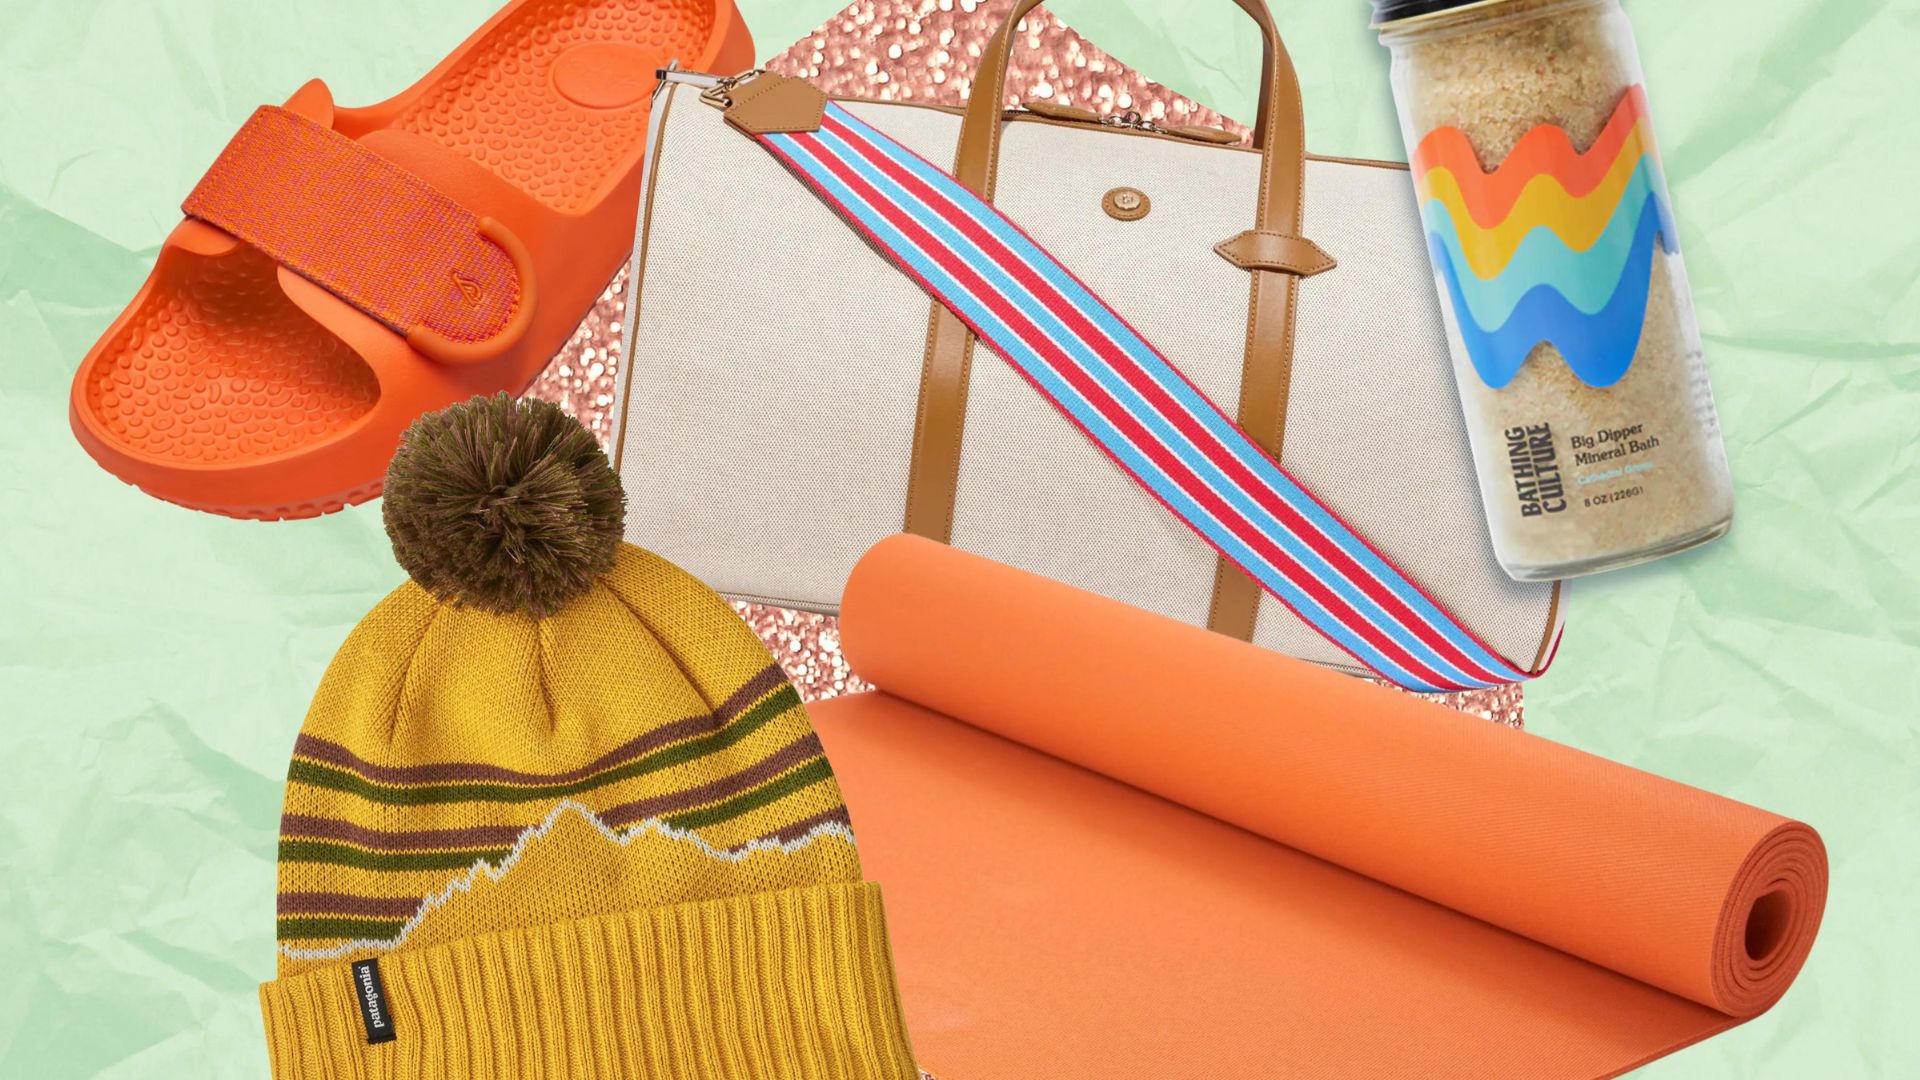 a yellow wool hat, an orange shoe, and an orange present wrapping paper